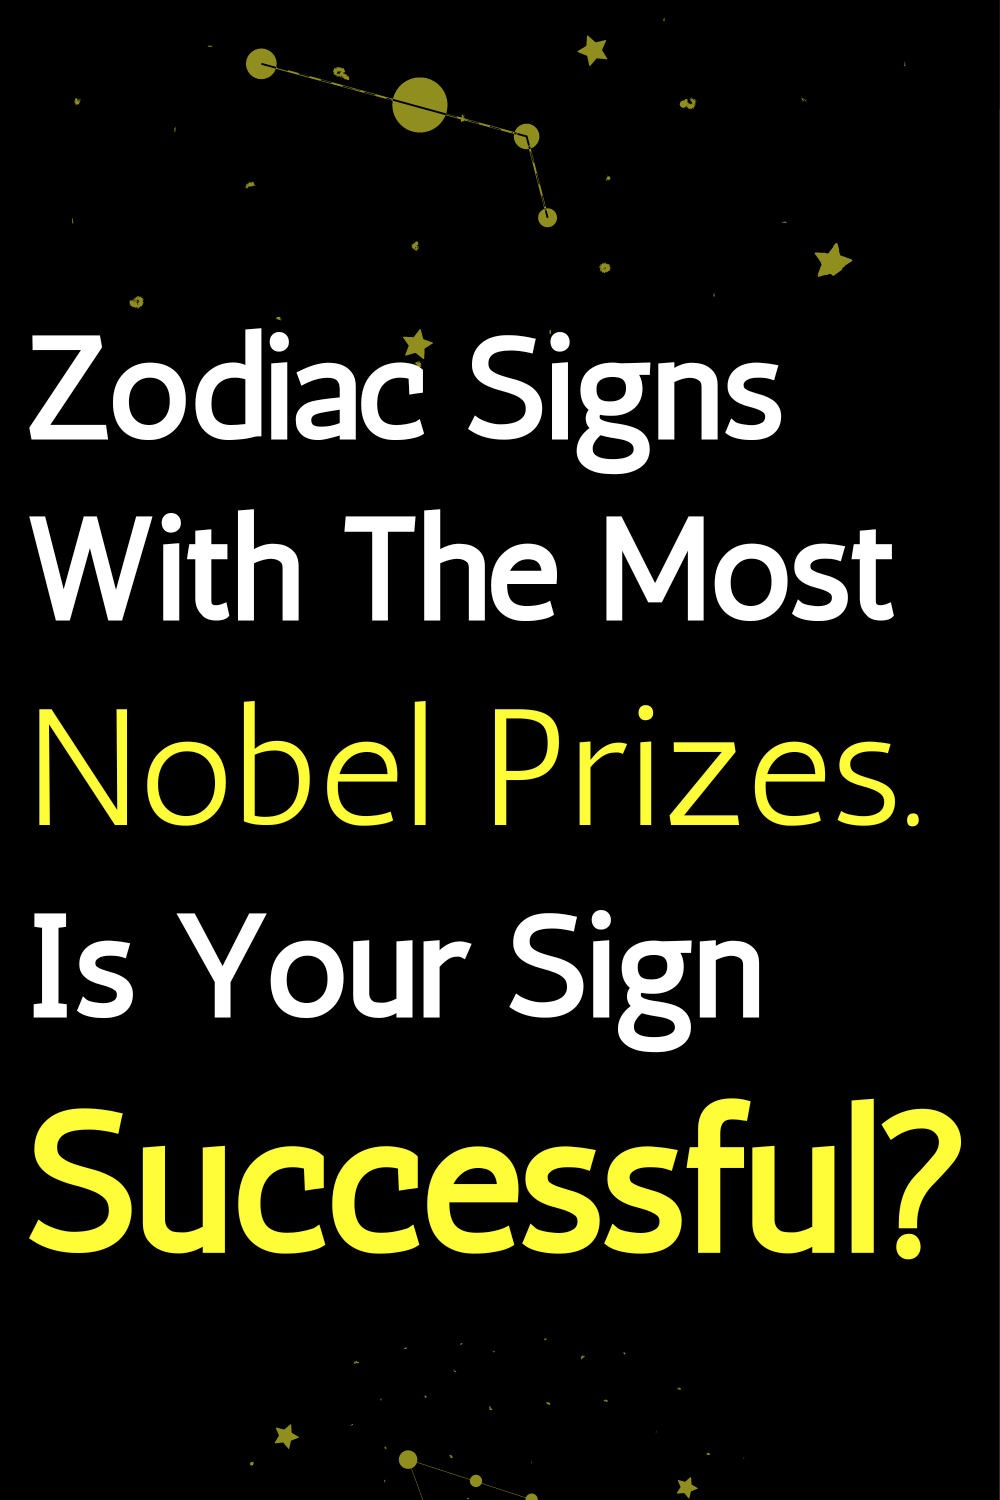 Zodiac Signs With The Most Nobel Prizes. Is Your Sign Successful?